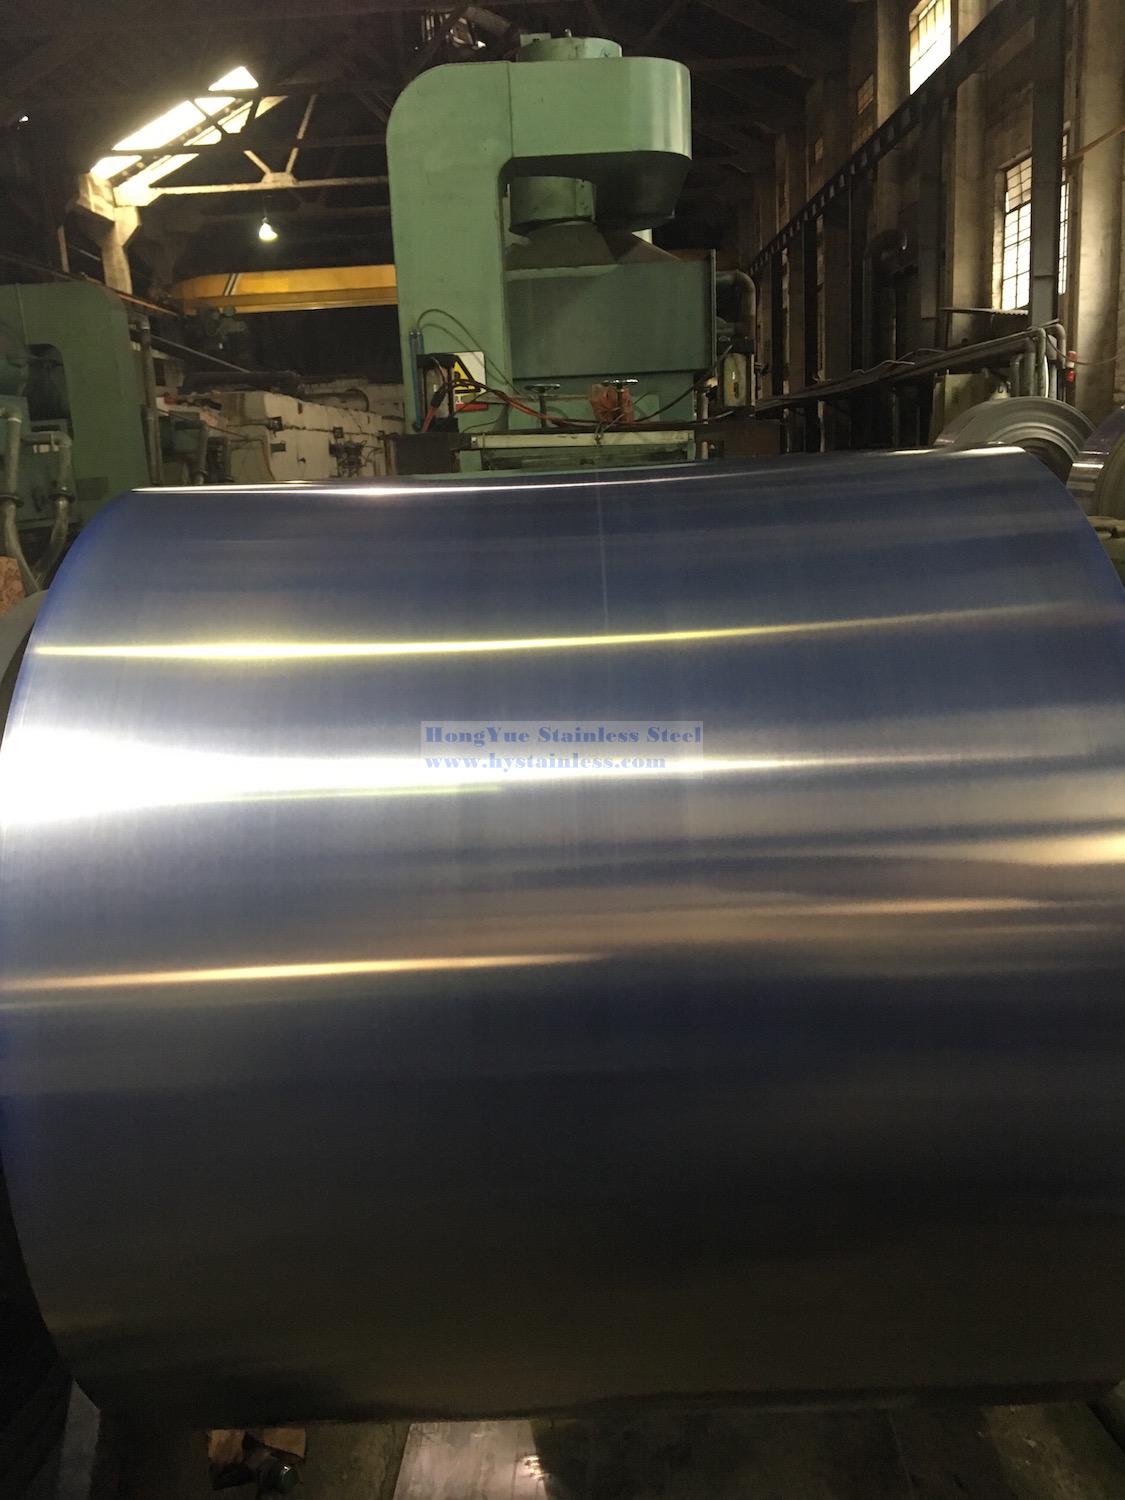 Stainless steel cold rolling factory-Hong Yue Stainless Steel